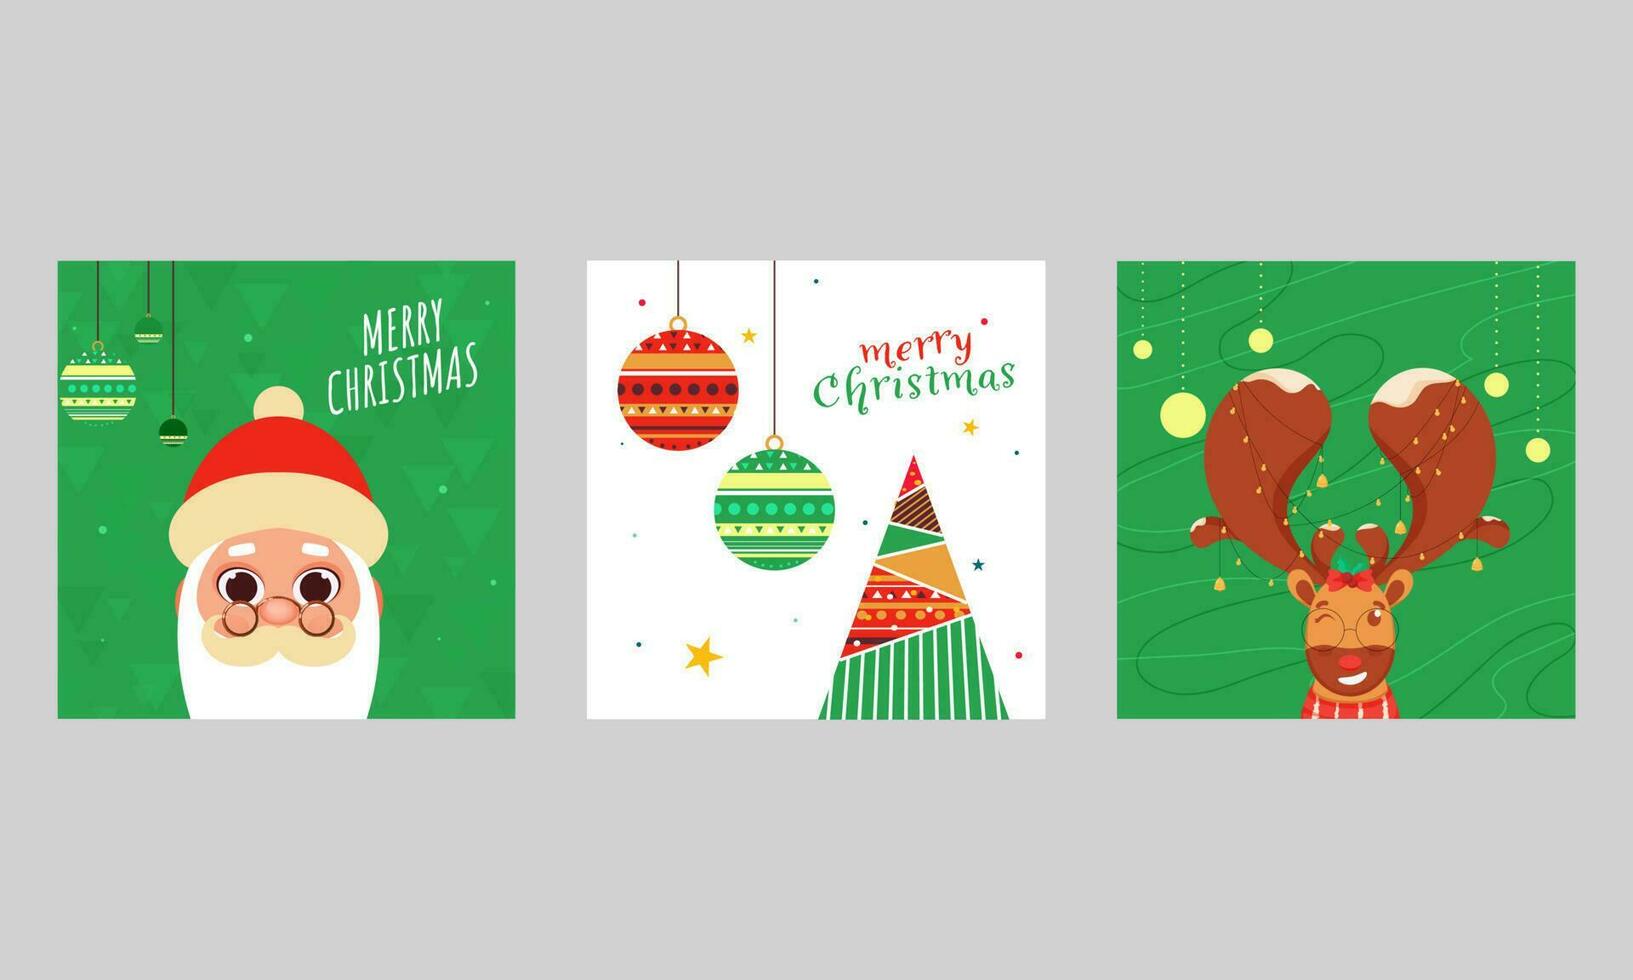 Merry Christmas Poster Design Set with Cute Santa Face, Xmas Tree, Cartoon Reindeer Winking and Hanging Baubles Decorated Background. vector